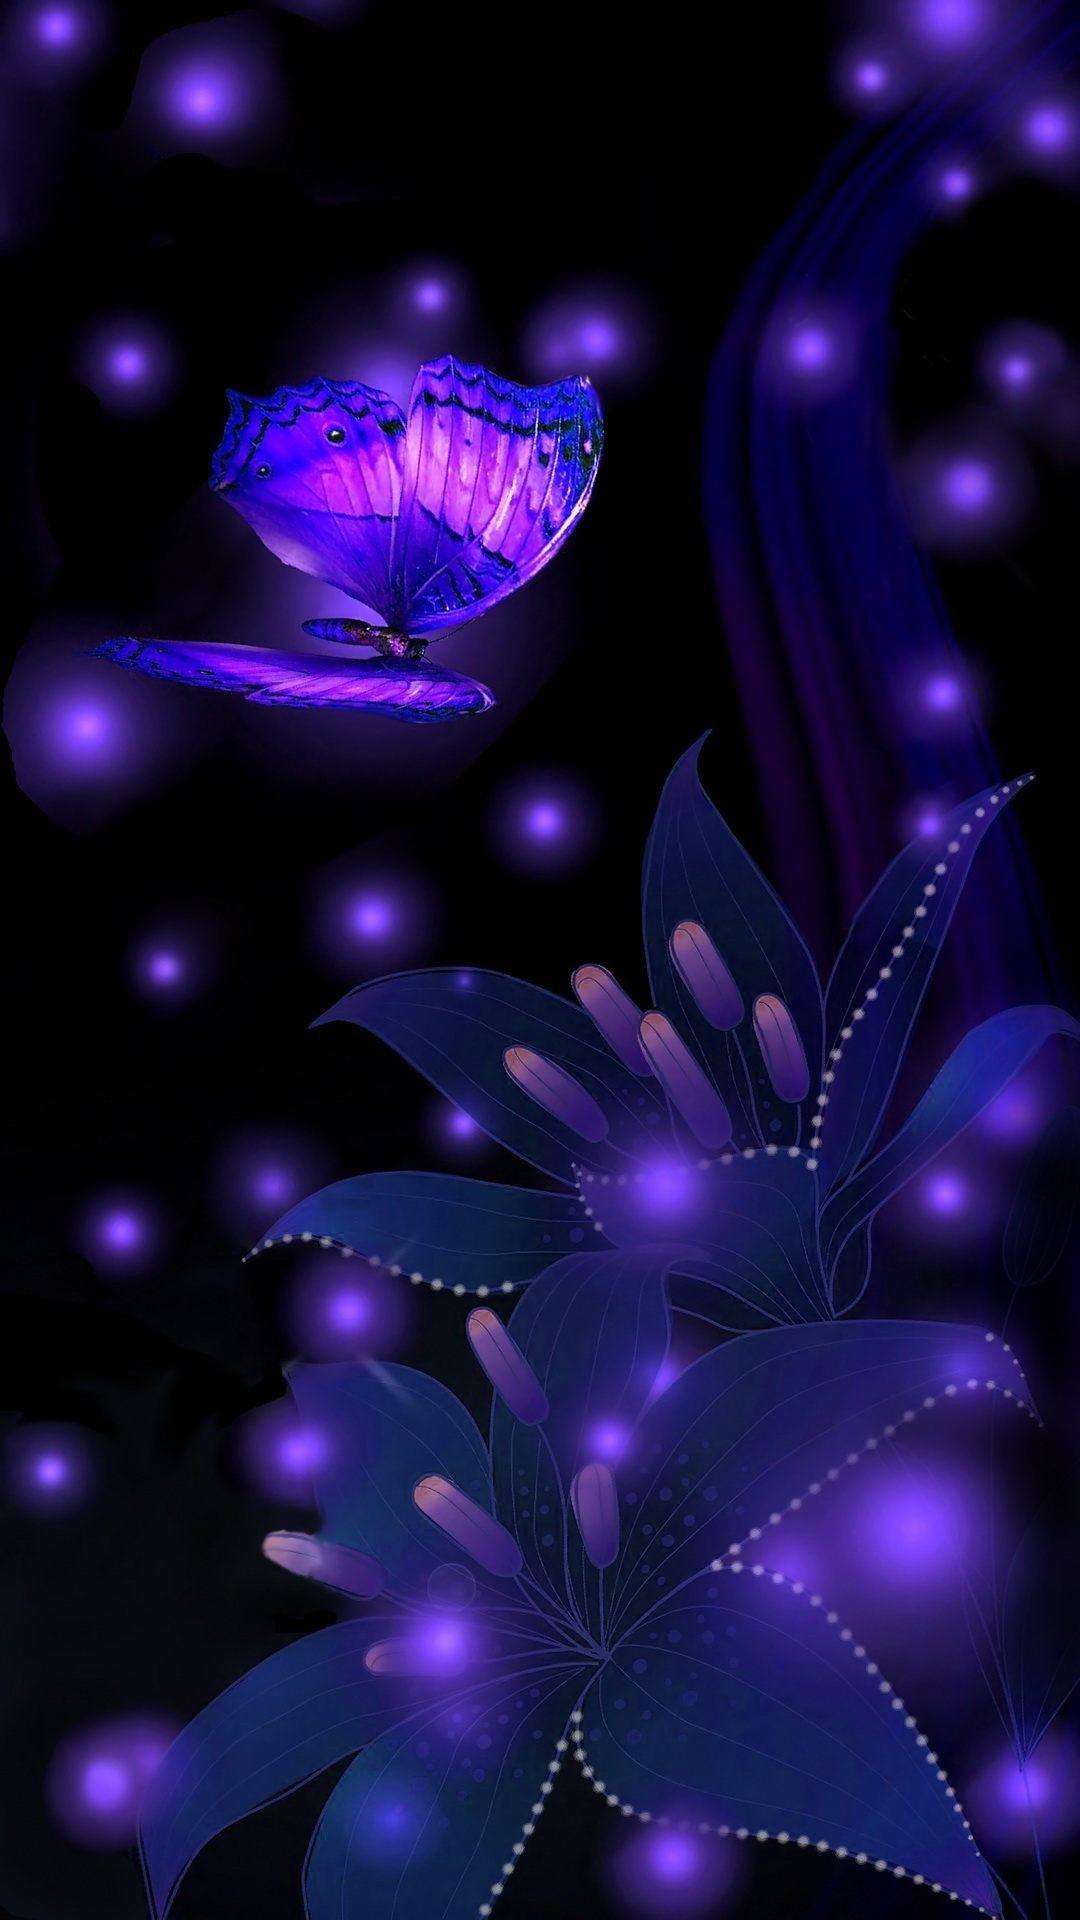 Abstract night magic- butterfly and flower wallpaper ♡. Butterfly wallpaper, Butterfly wallpaper iphone, Dark wallpaper iphone